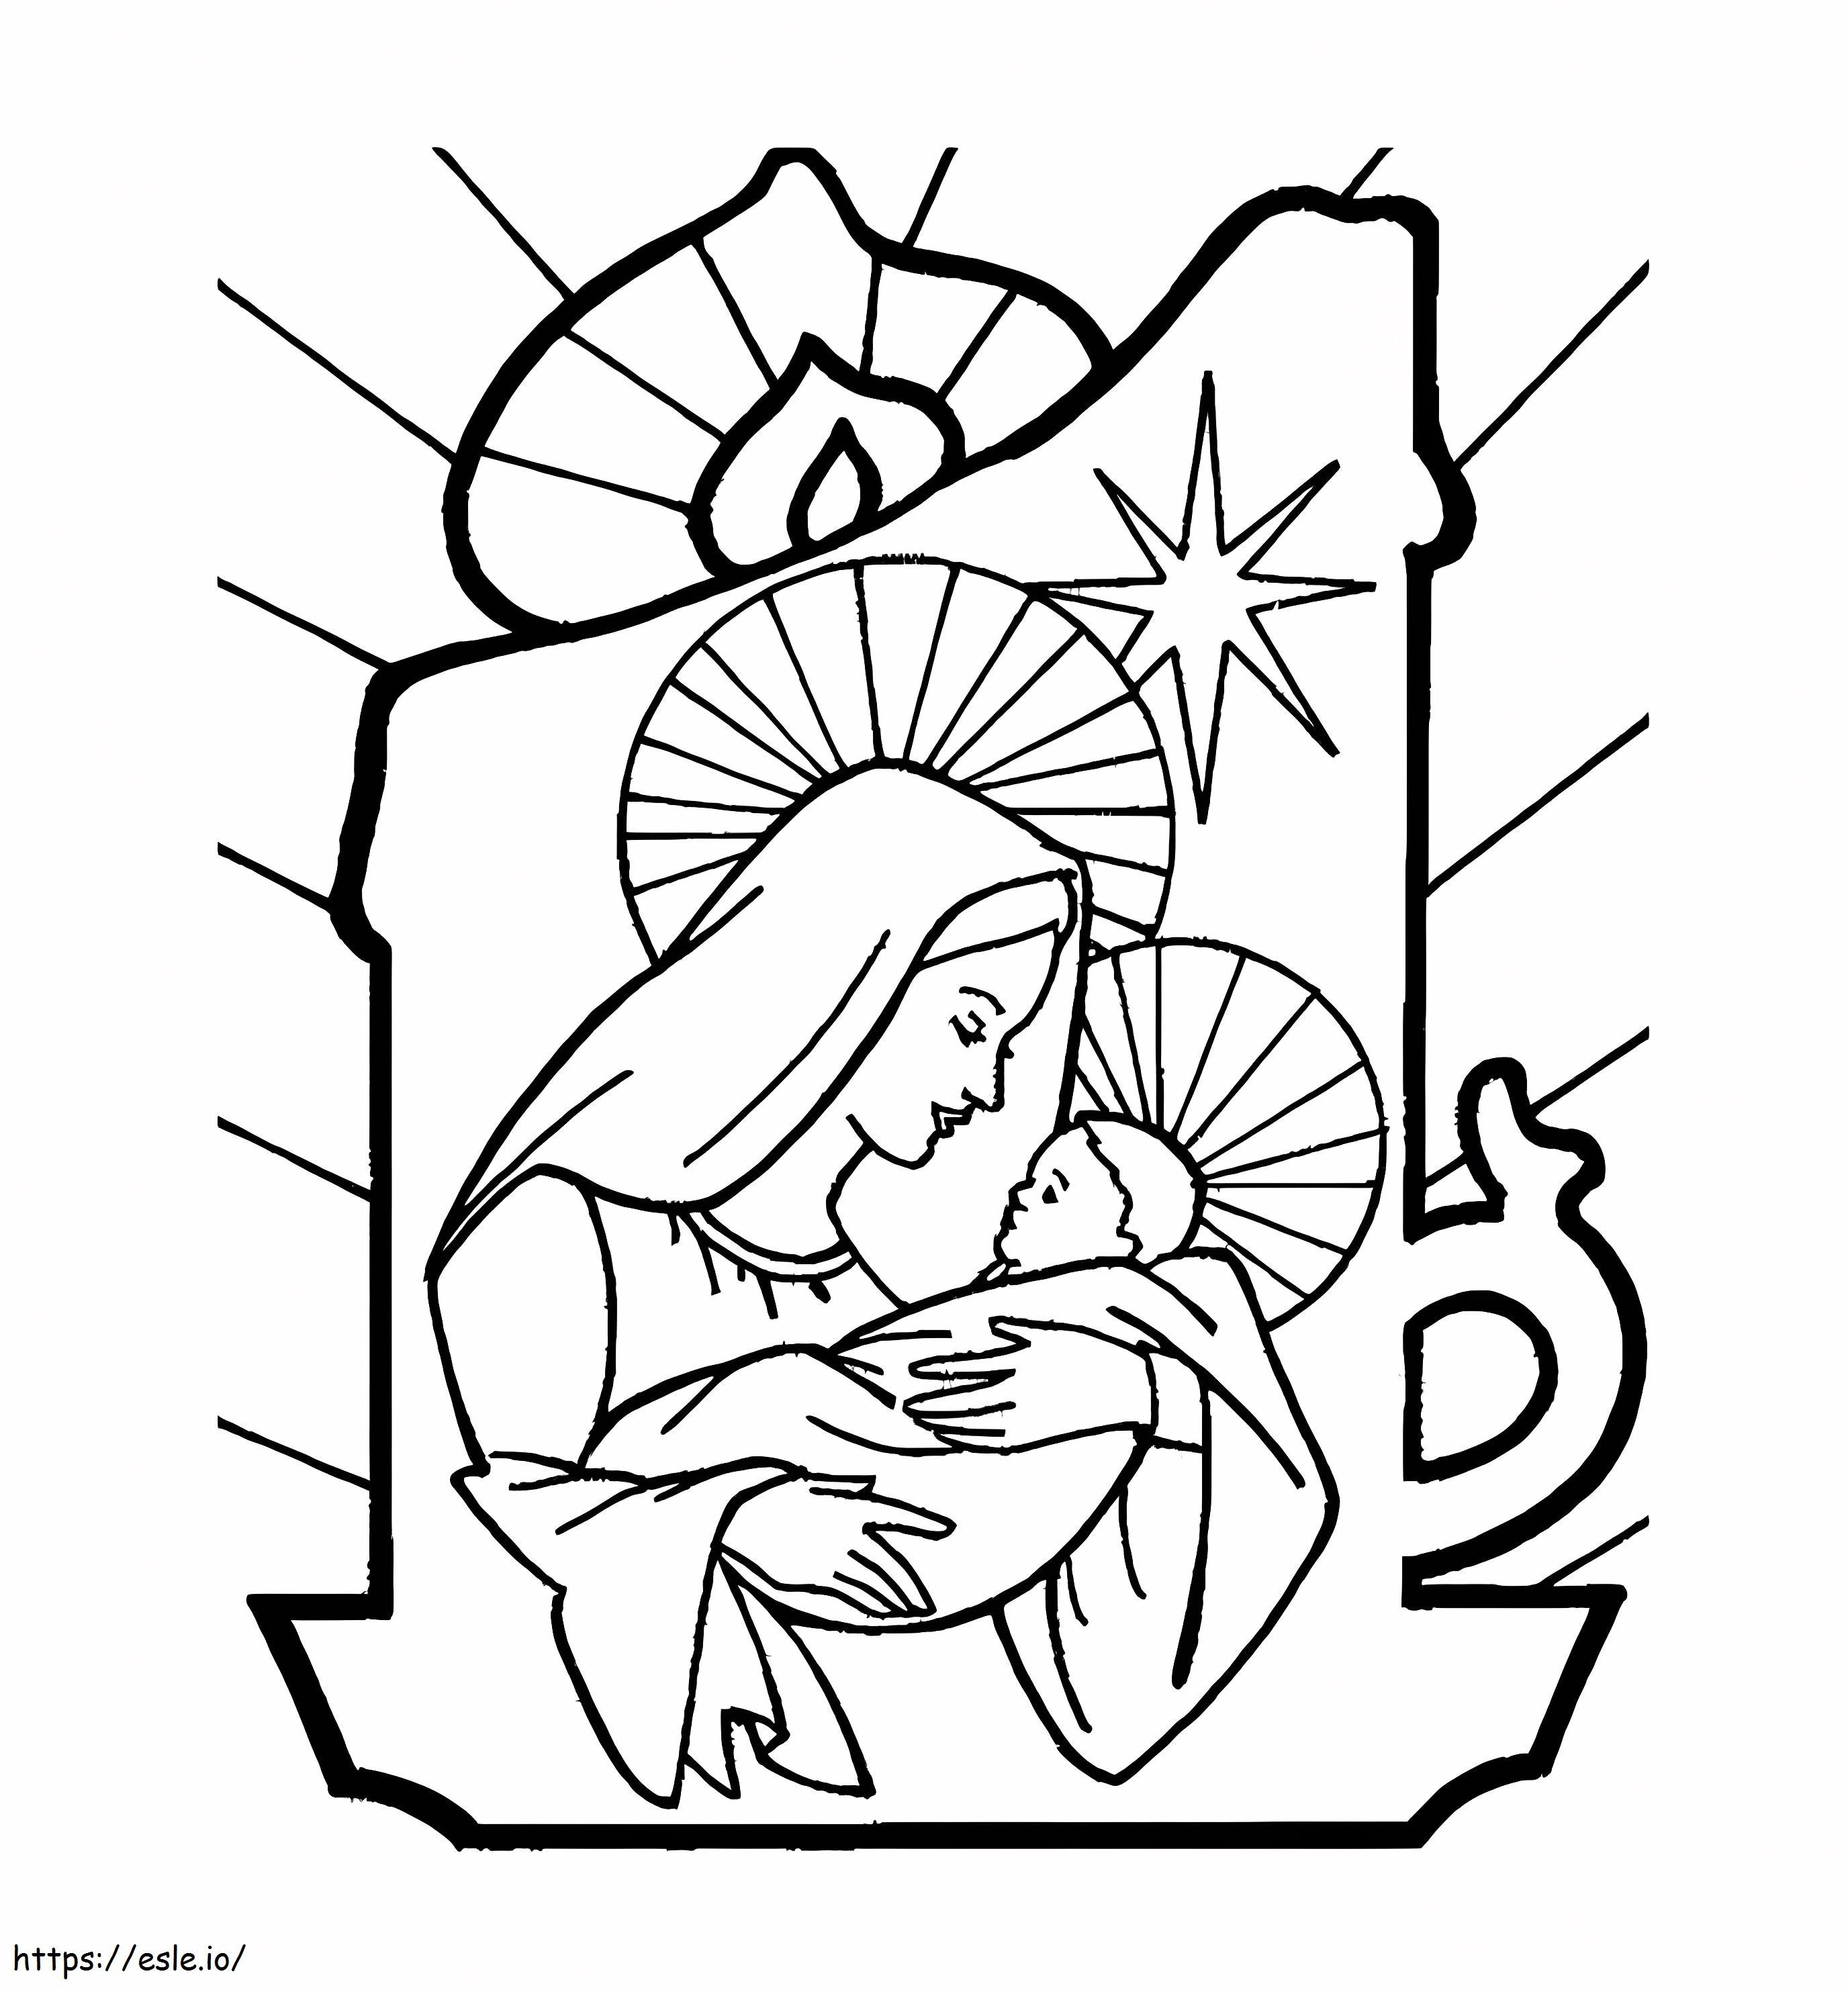 Outline Of The Mother Of Jesus For Coloring coloring page